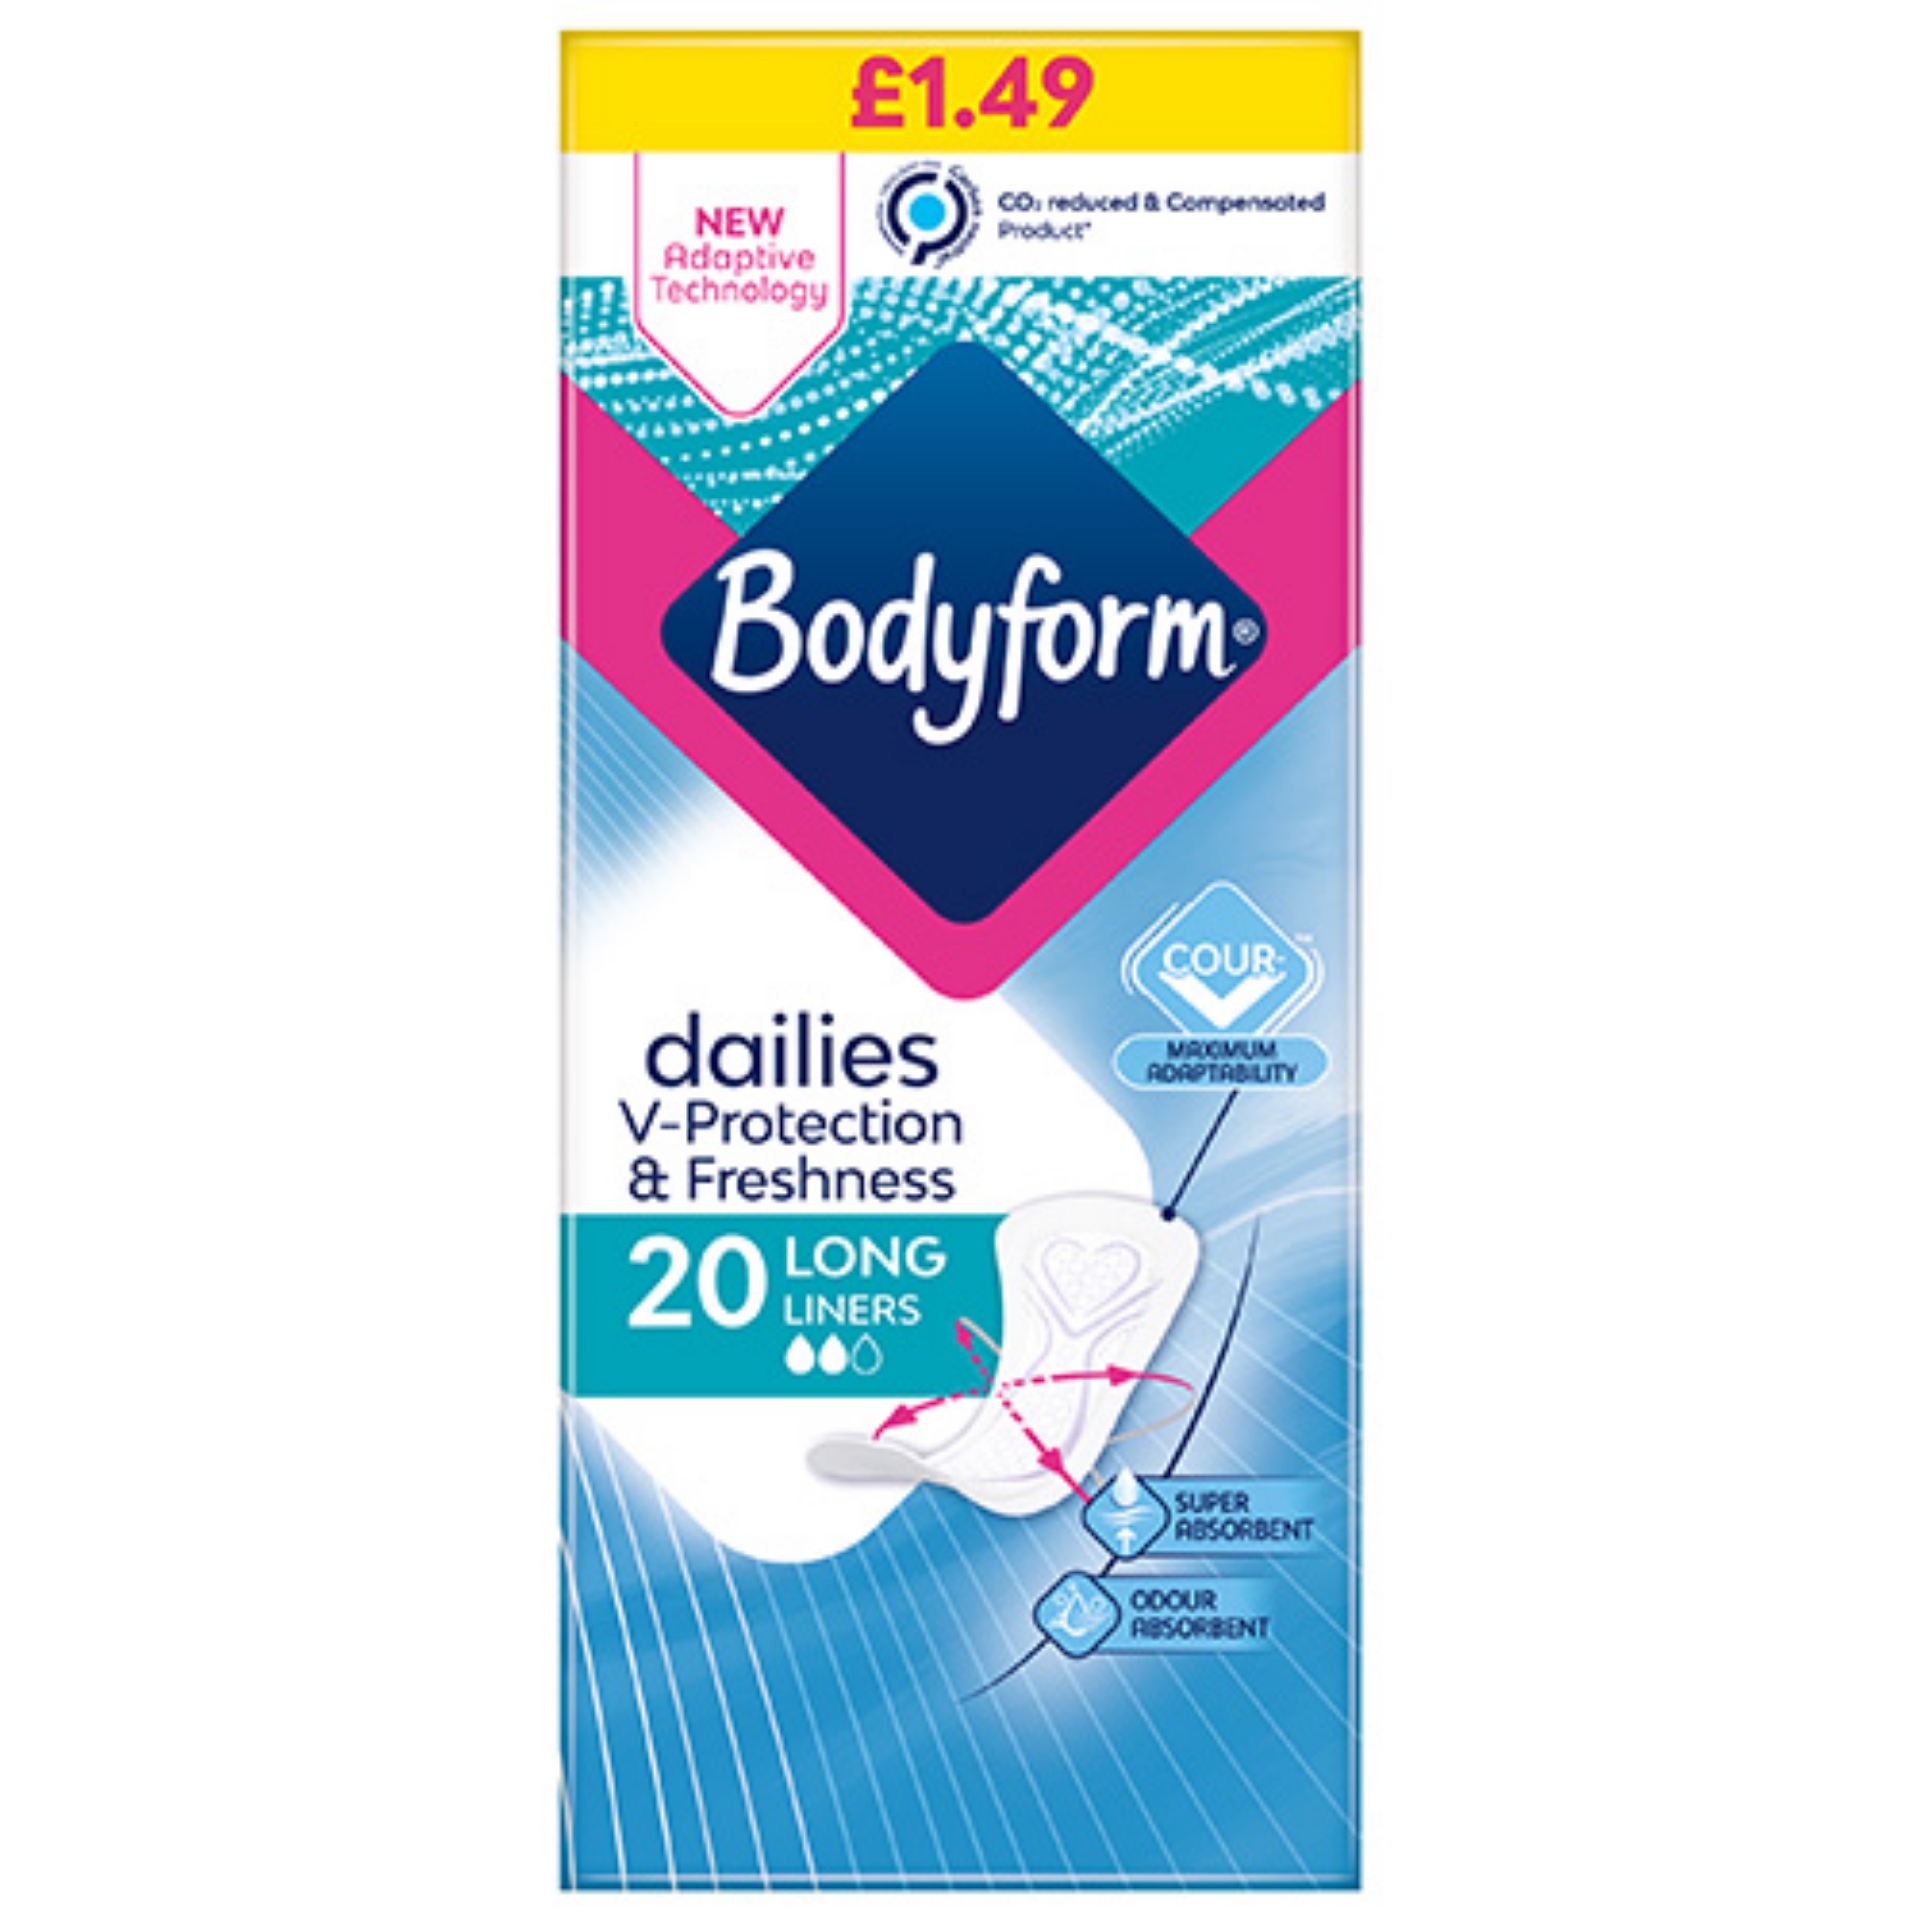 Picture of BODYFORM DAILIES V-PROTECTION LONG LINERS pm1.49